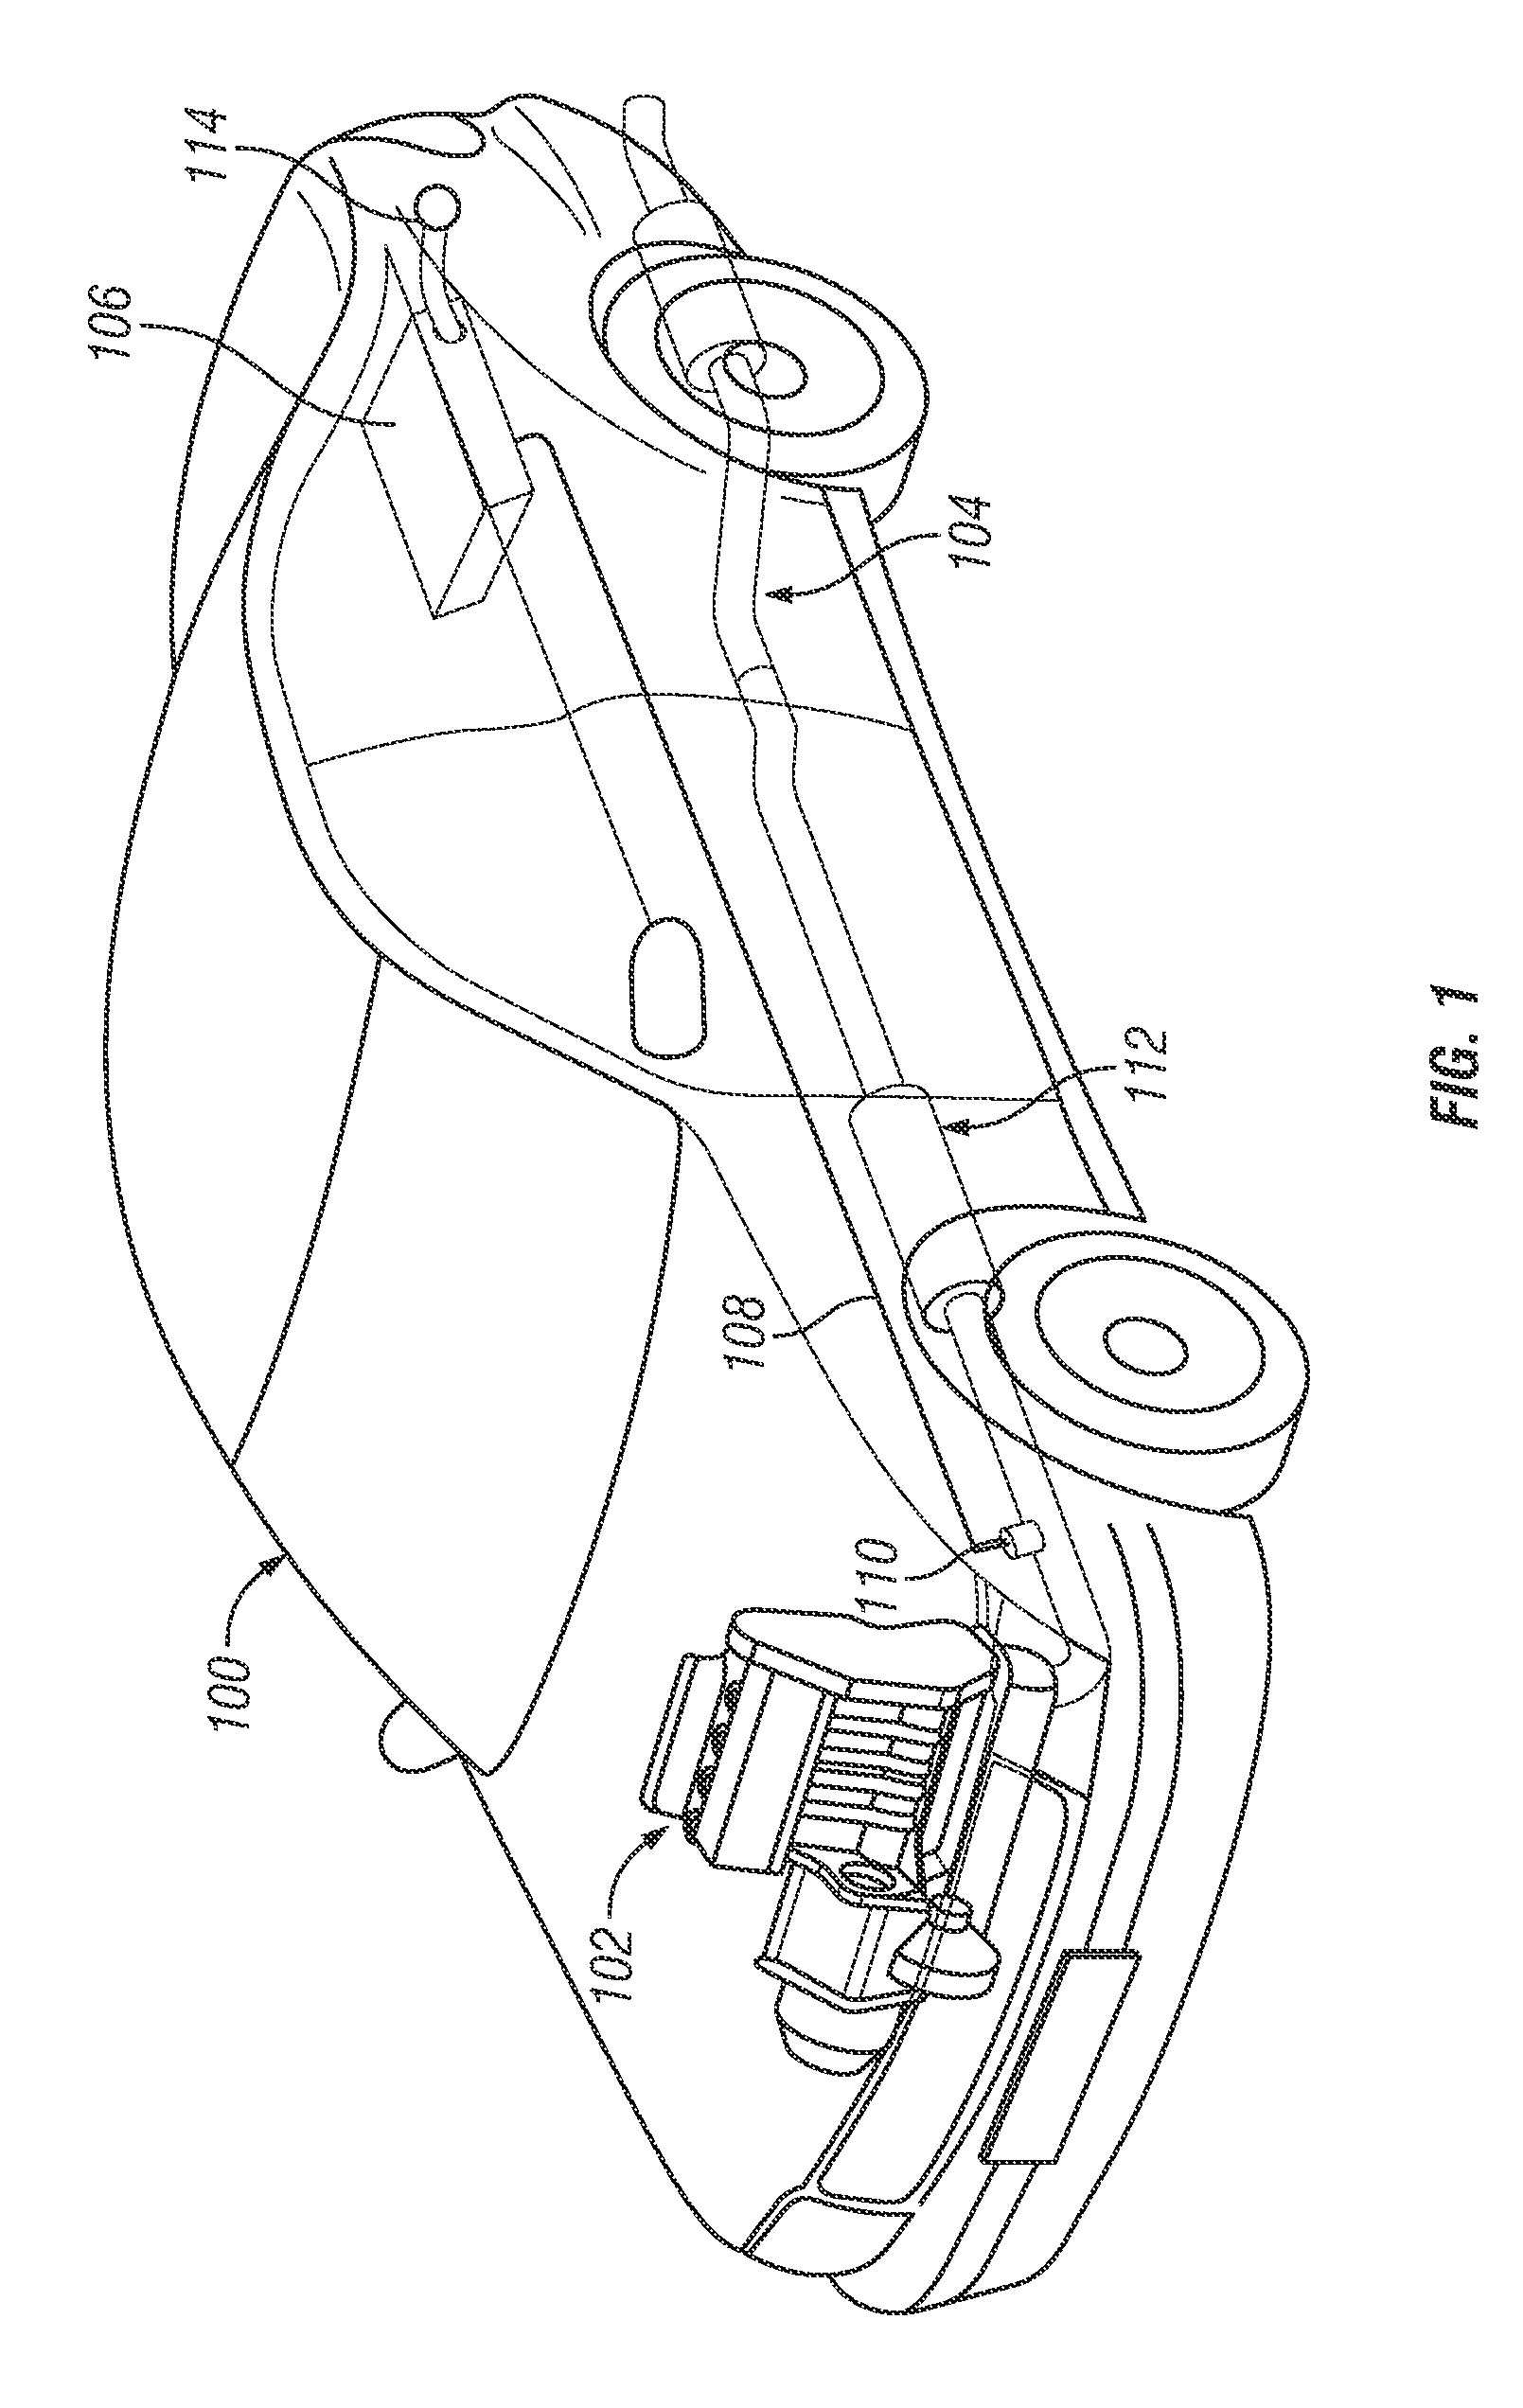 Emission control system for a vehicle